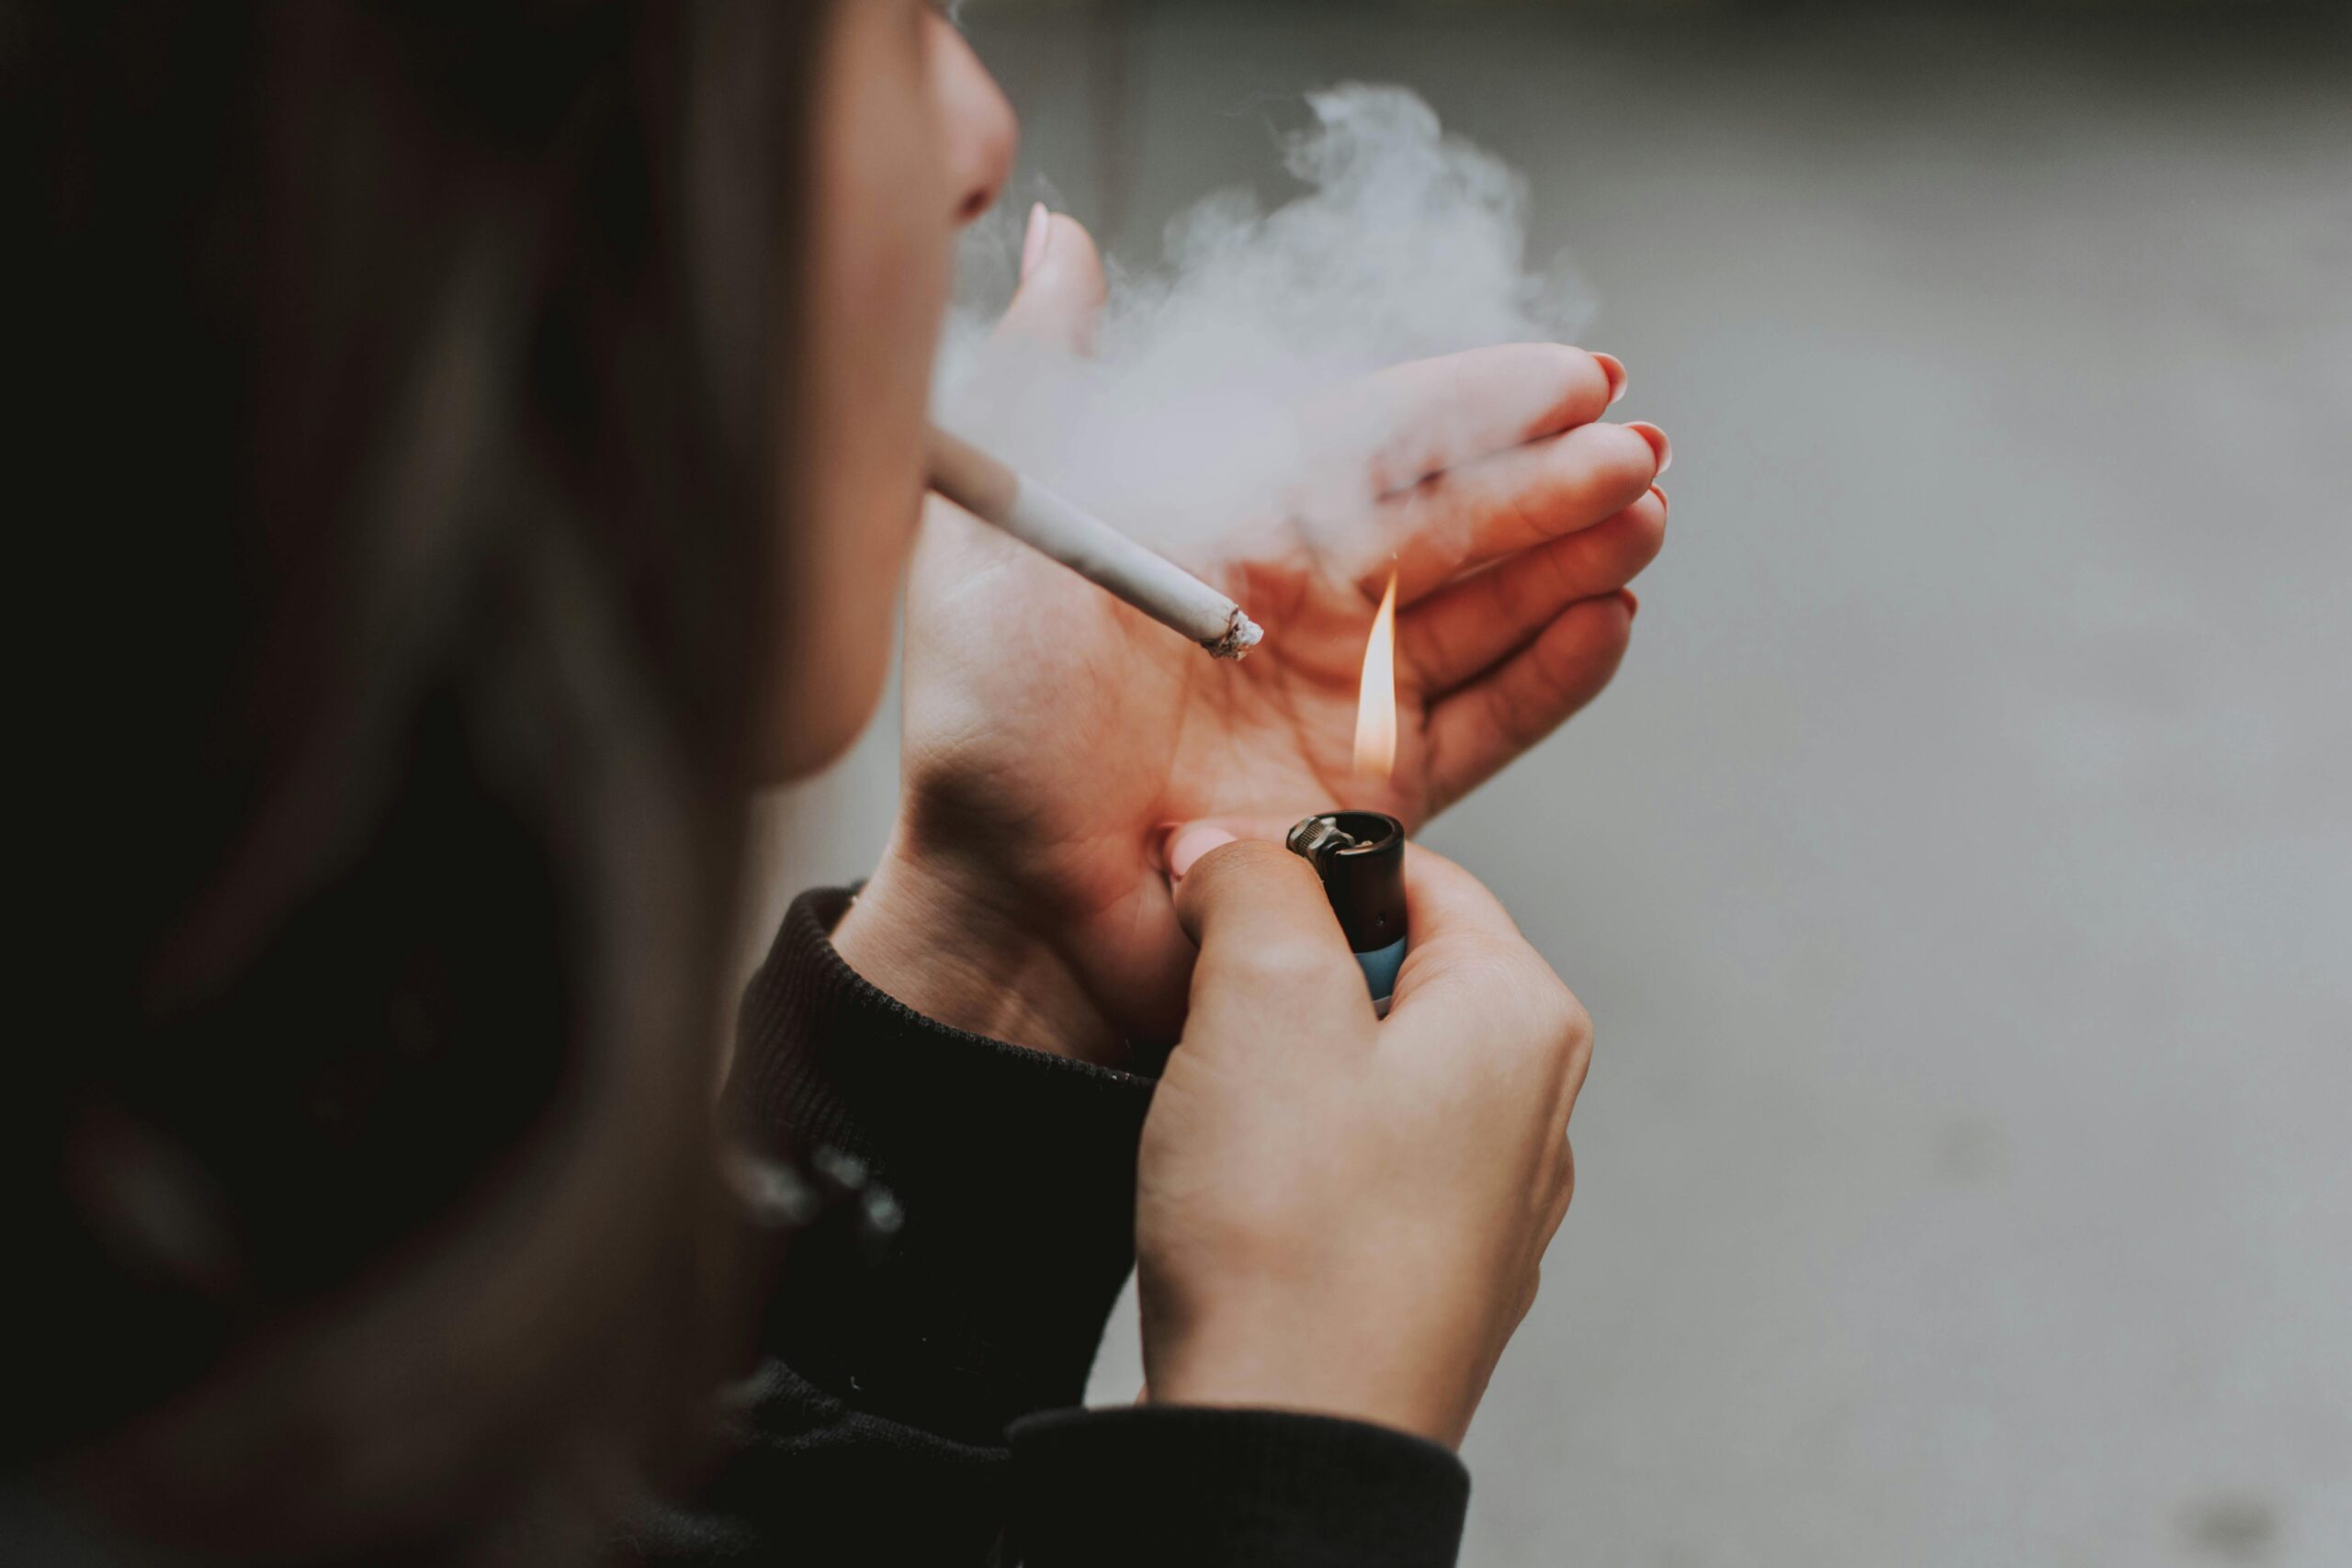 Majority of Danes approve of ban on smoking in public areas